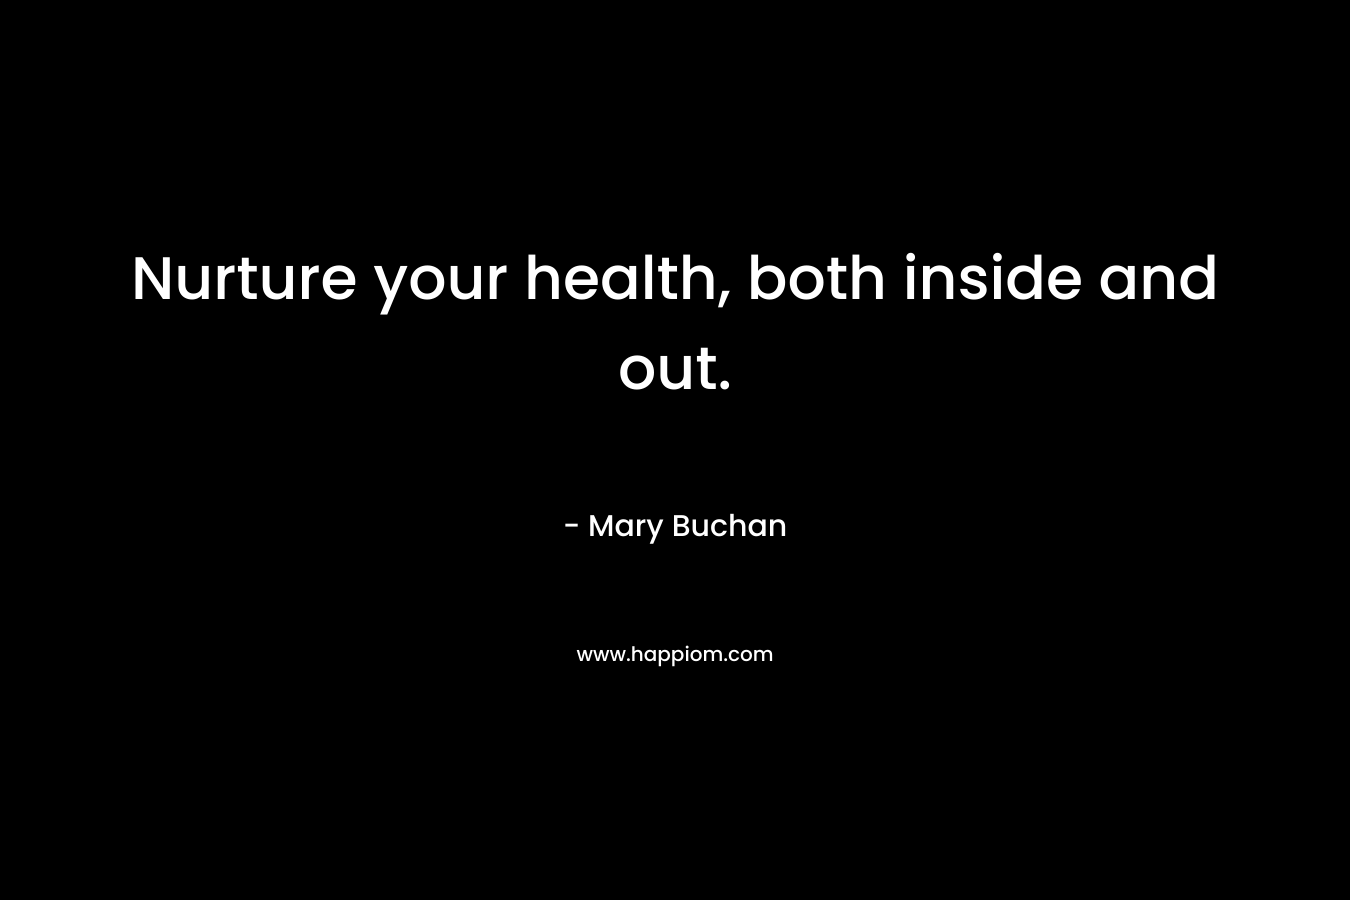 Nurture your health, both inside and out.